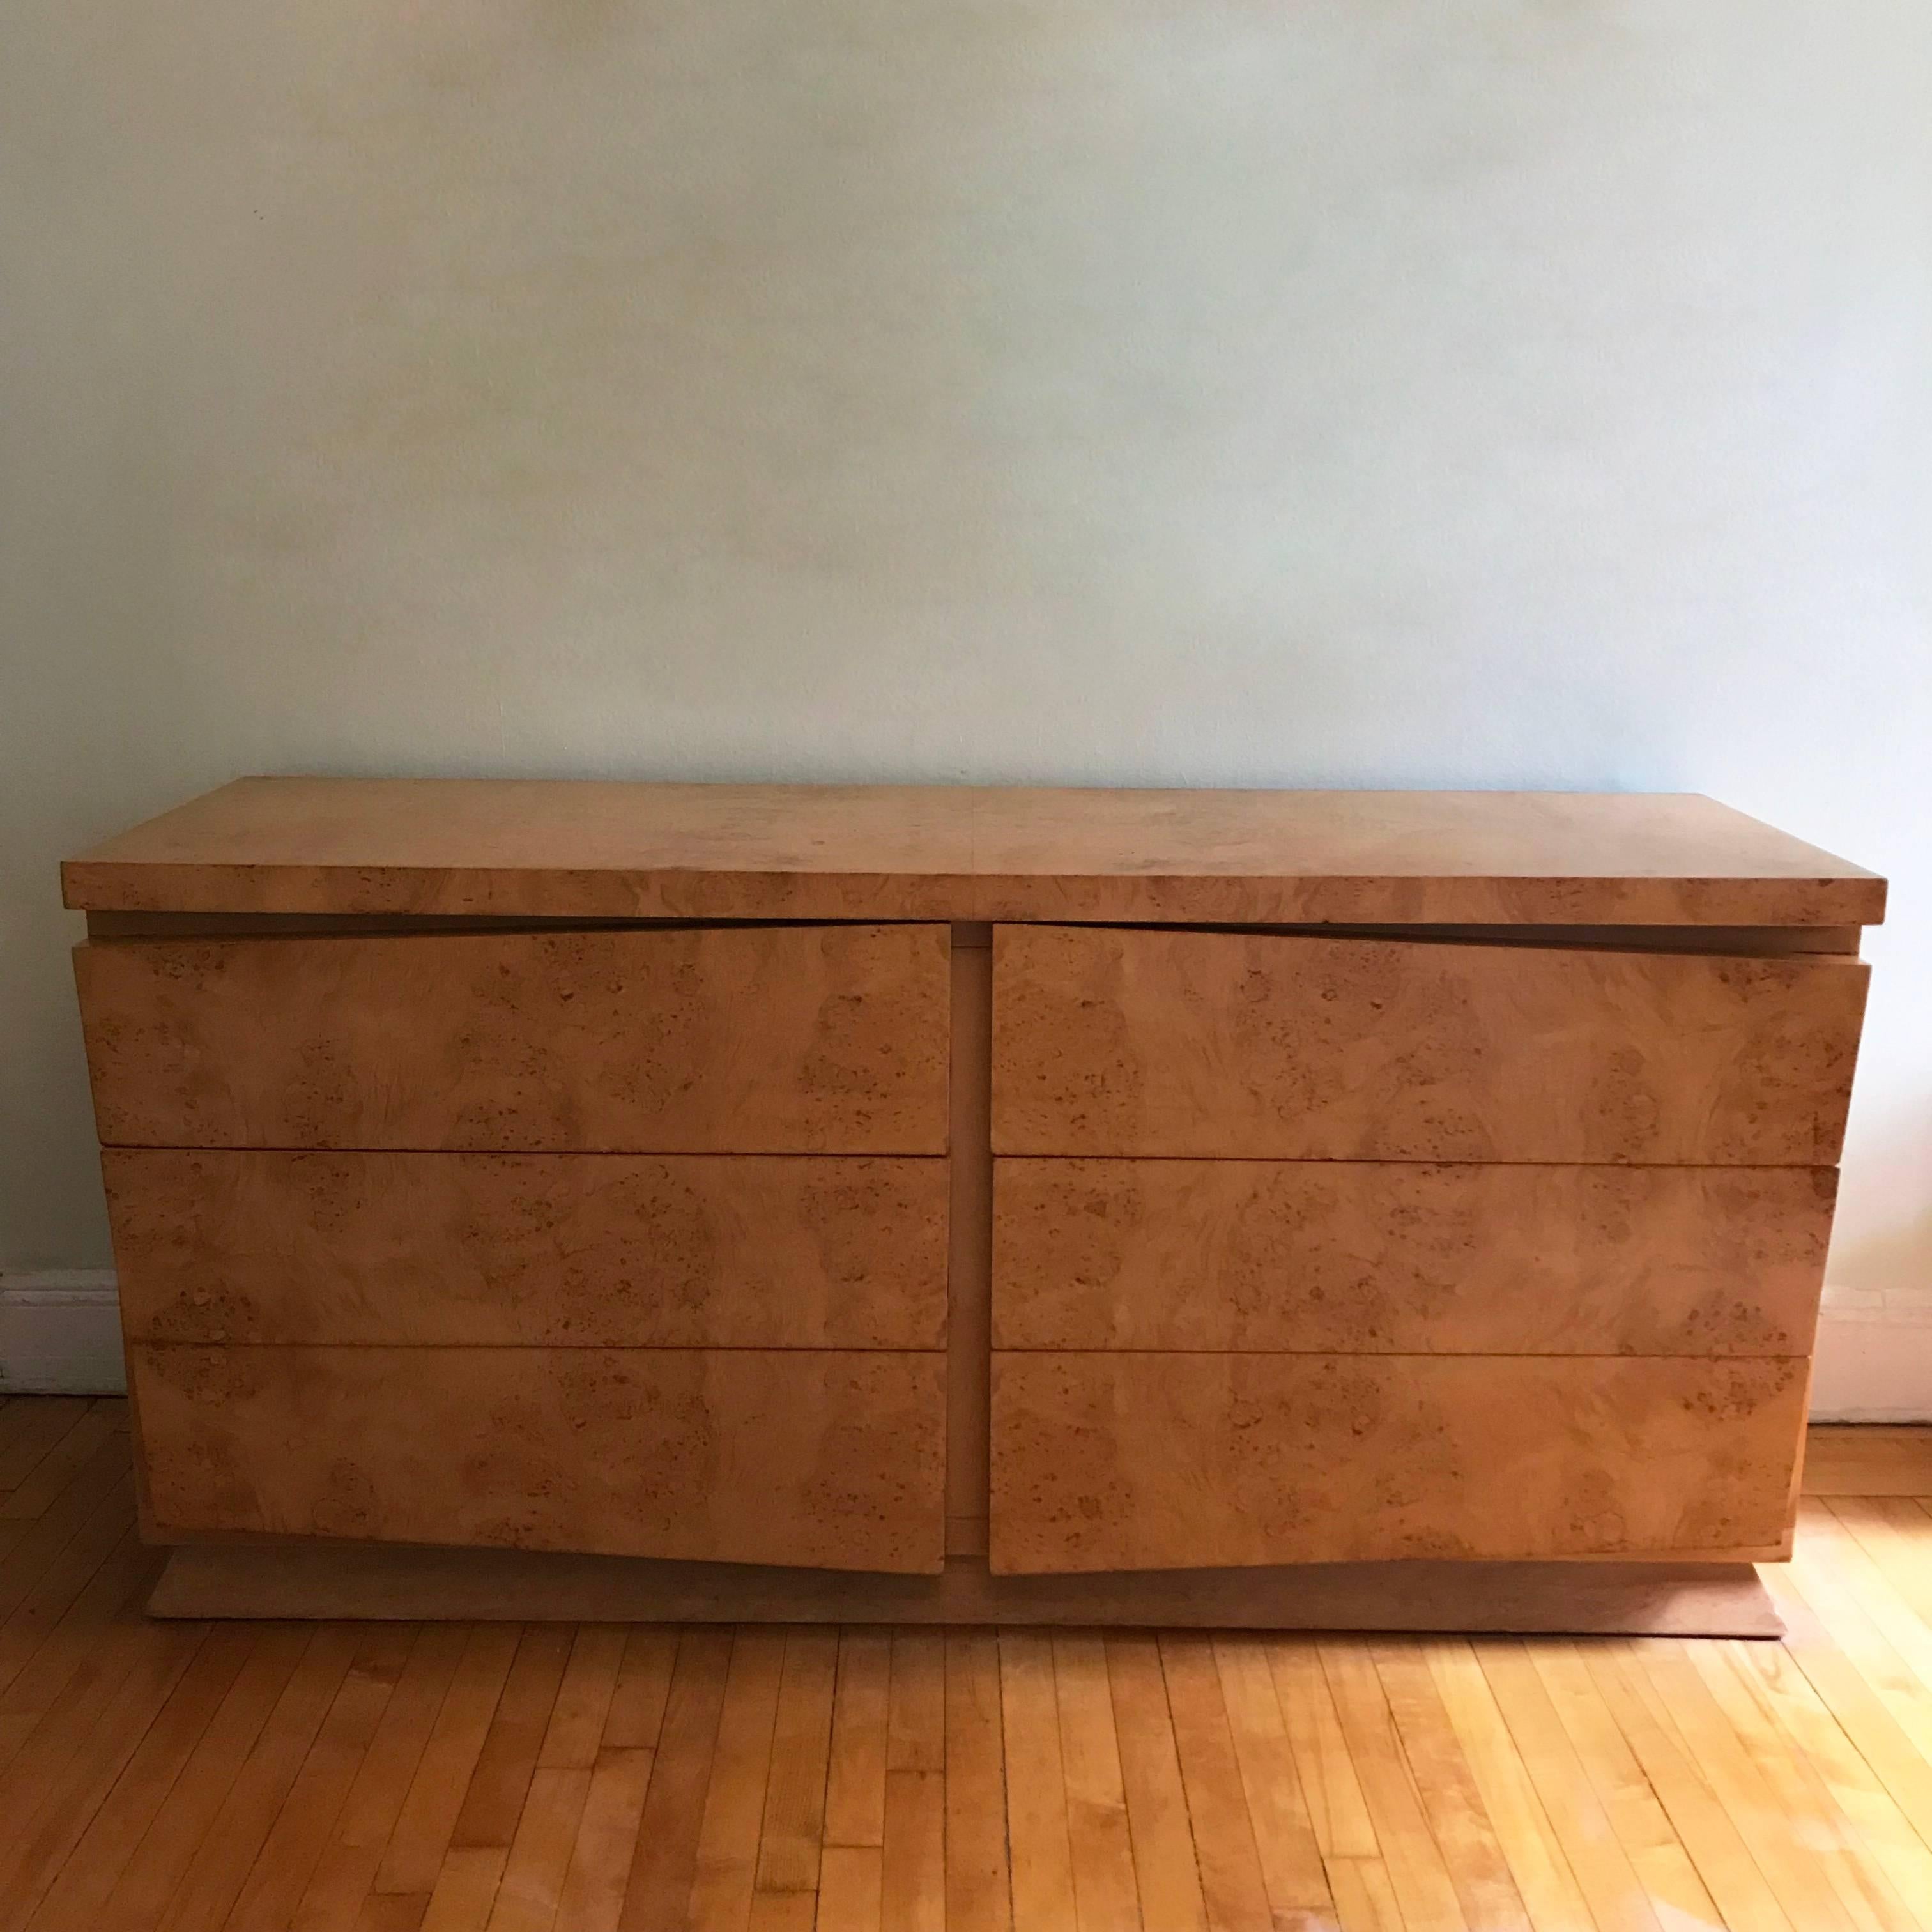 Outstanding, double-wide, Mid-Century Modern, dresser by Red Lion Furniture features architectural lines, with decoratively angled fronts on it's 6 large 7.5 inch height drawers with angled base. The designer is unknown but the accentuated lines